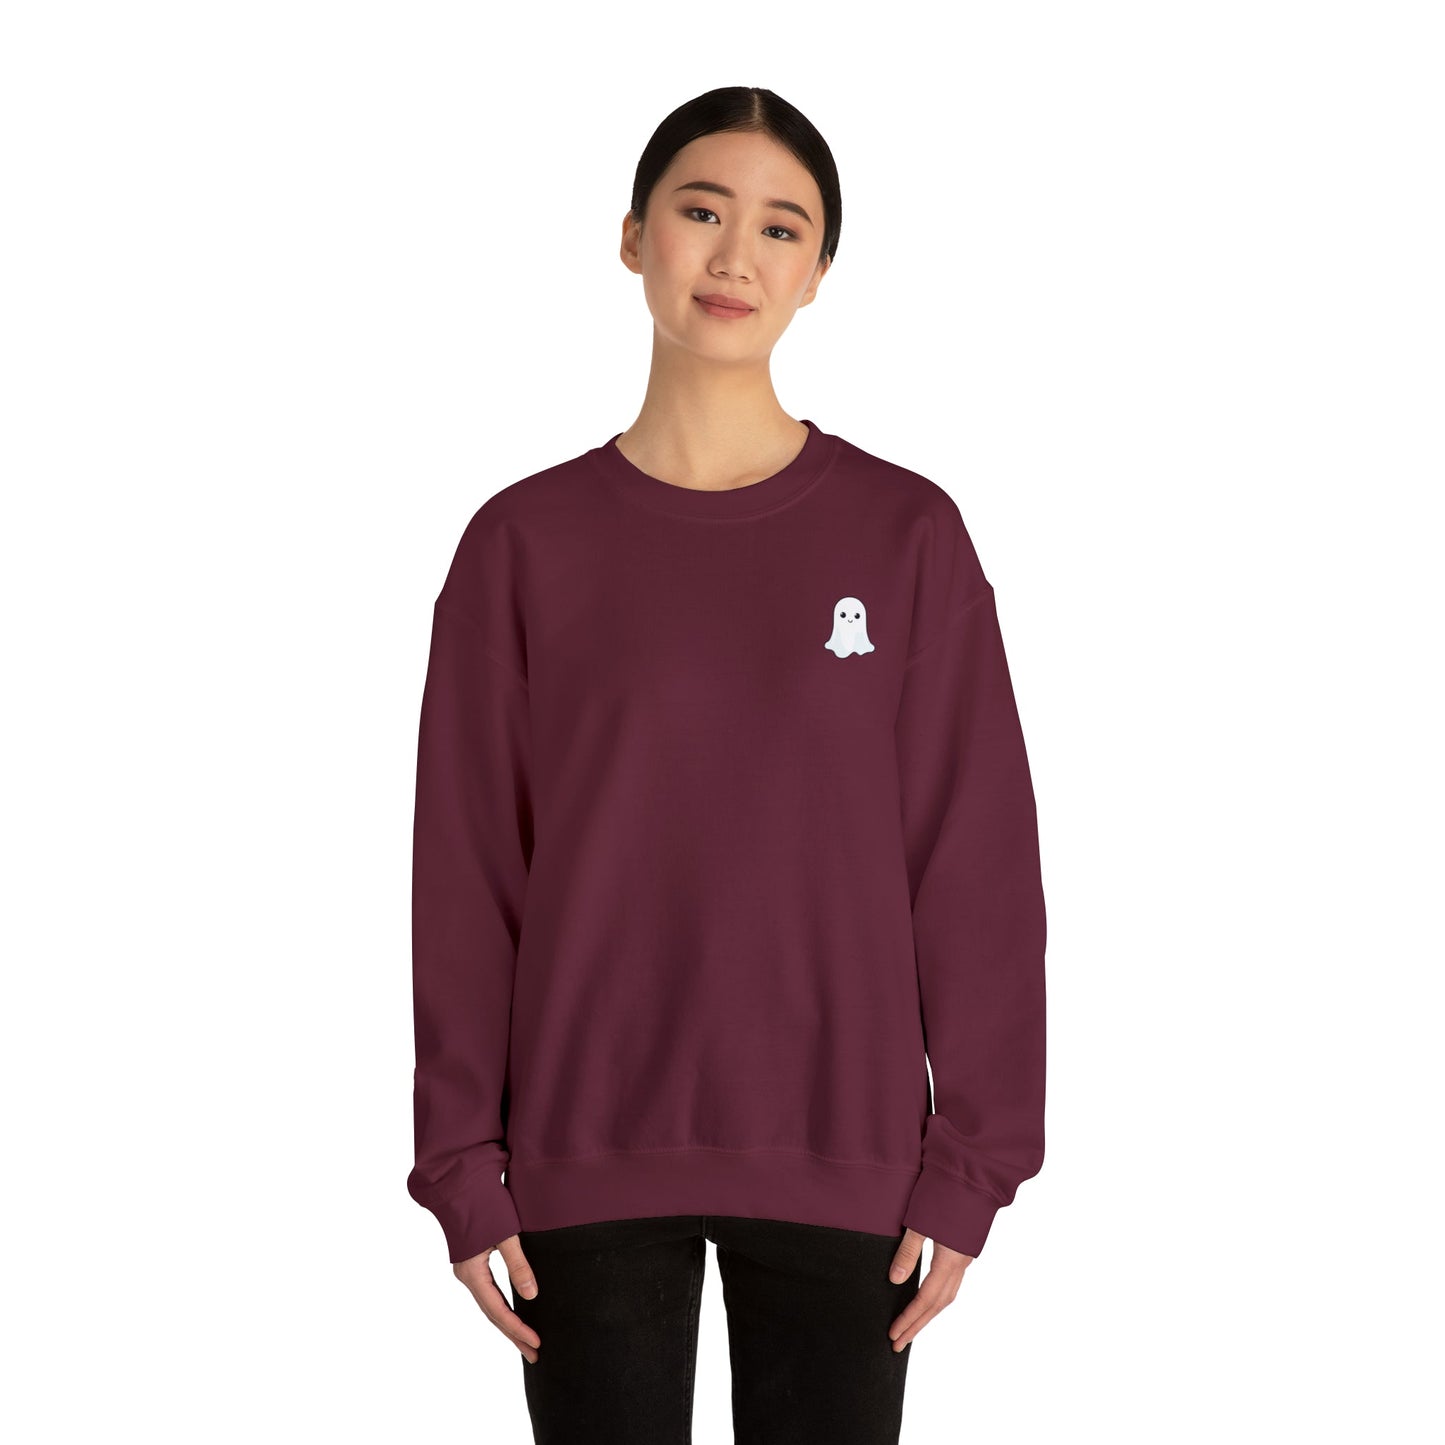 Get trendy with Ghost Sweatshirt - Sweatshirt available at Good Gift Company. Grab yours for $38 today!